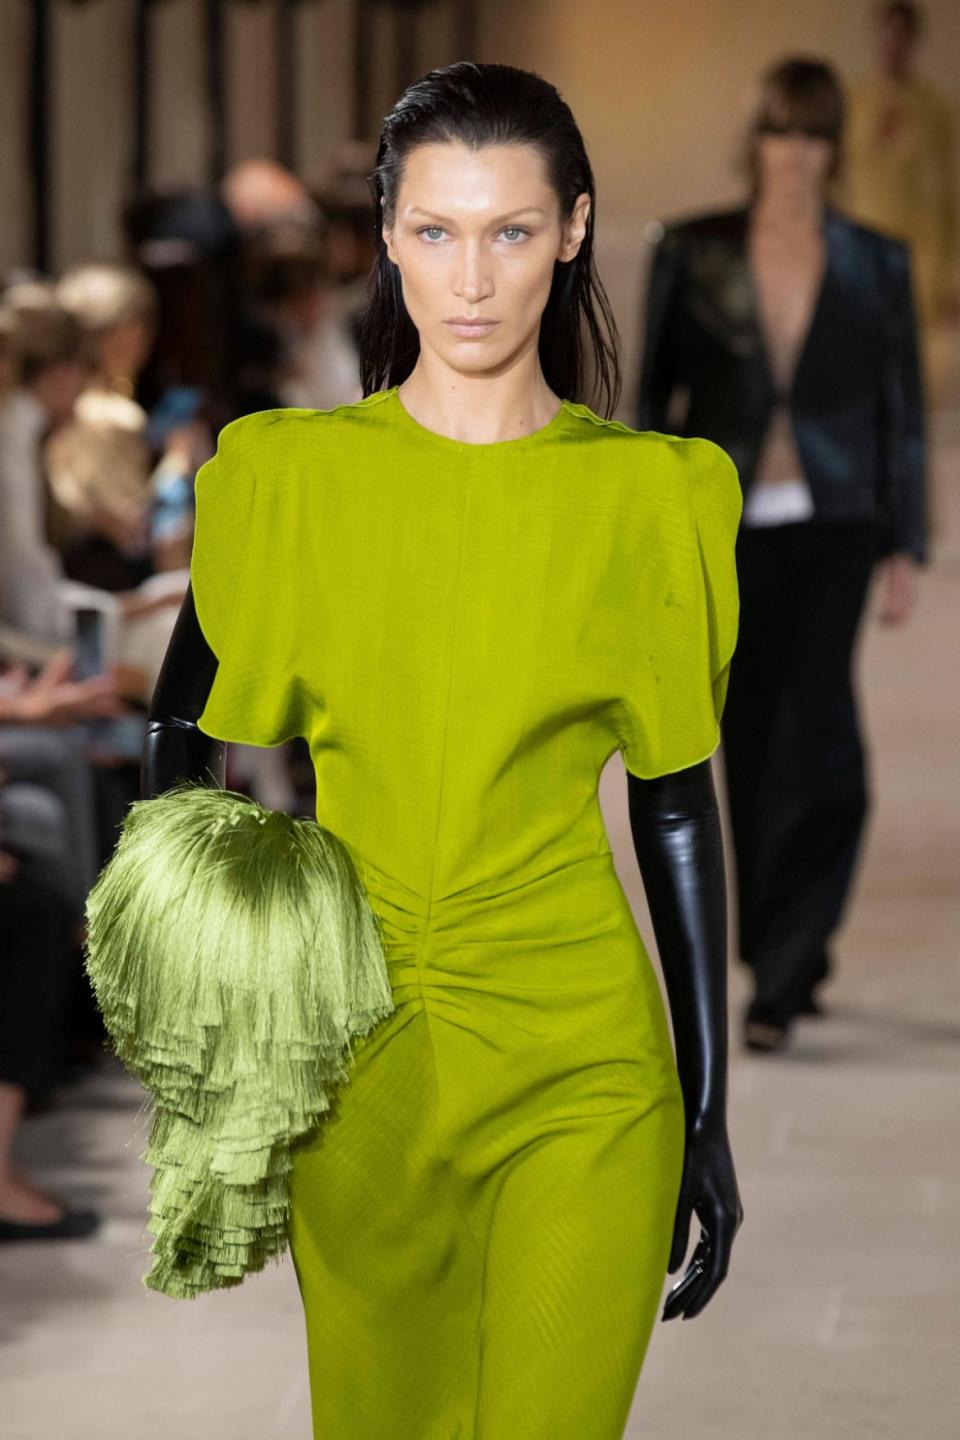 <div class="inline-image__caption"><p>Bella Hadid walks the runway during the Victoria Beckham Ready to Wear Spring Summer 2023 show as part of the Paris Fashion Week.</p></div> <div class="inline-image__credit">Victor Virgile/Gamma-Rapho via Getty</div>